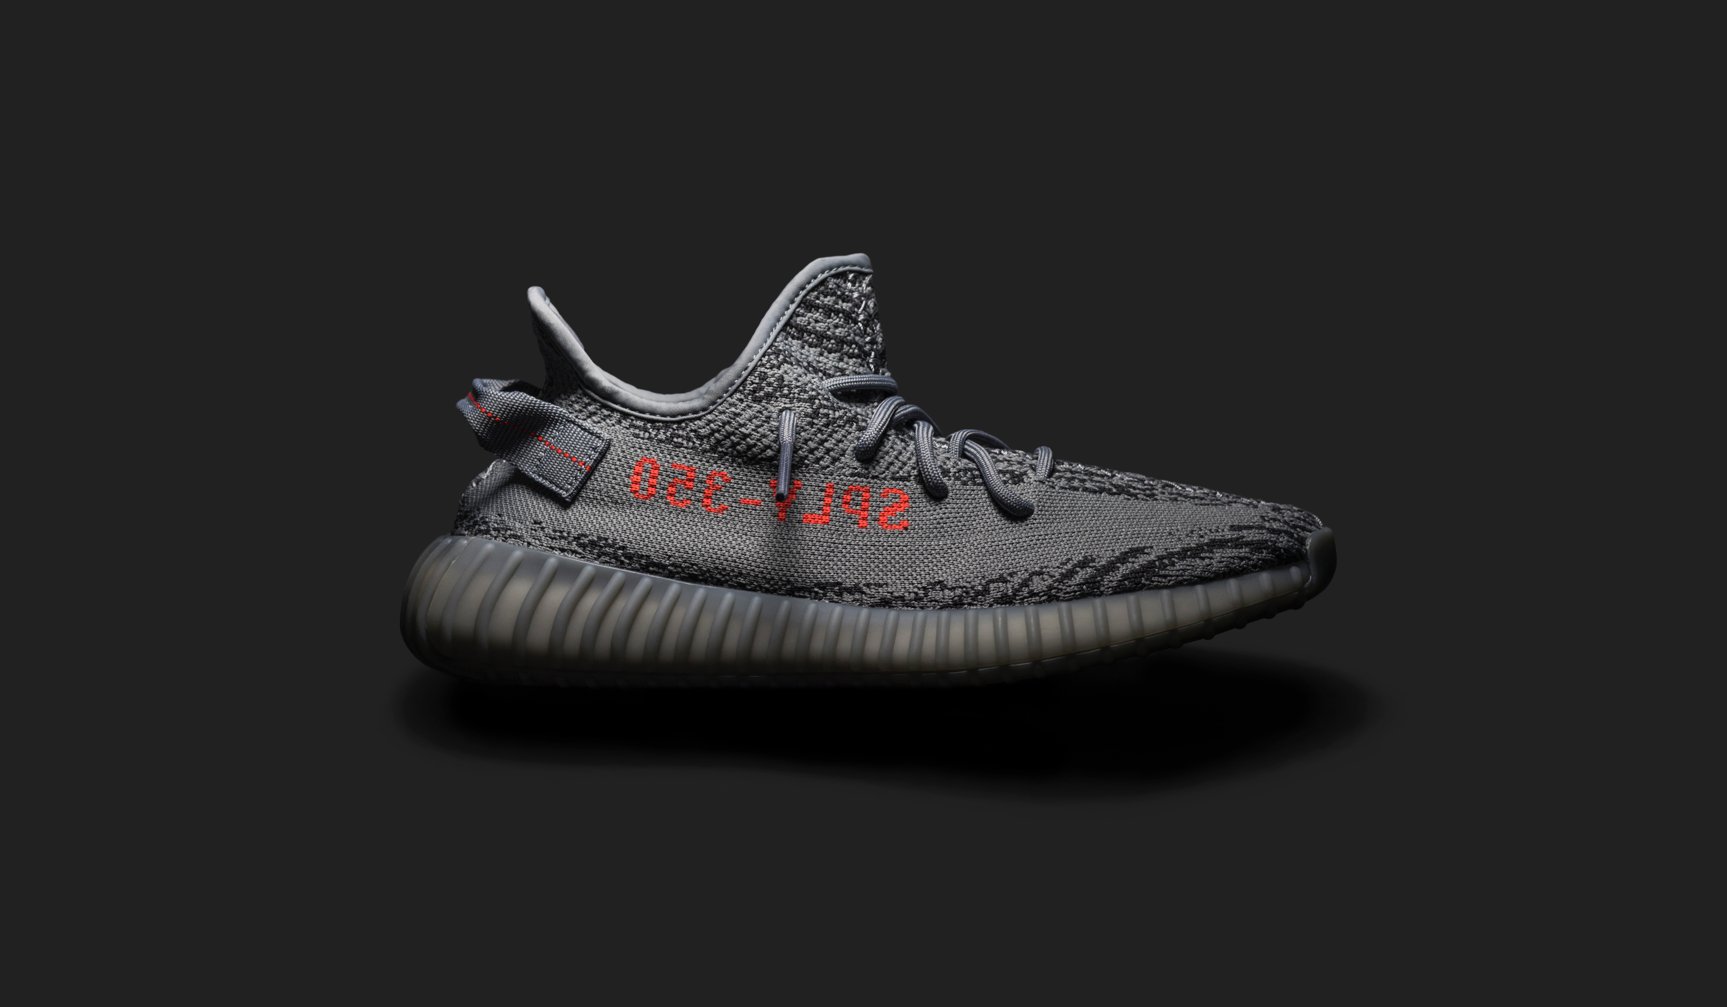 GOAT on X: "The Yeezy 350 V2 'Beluga 2.0' features a grey Primeknit upper  with reversed 'SPLY-350' branding in Bold Orange on the side panels.  Available on the app and https://t.co/NY0Z2EJuxw: https://t.co/Zo44wh9AHS